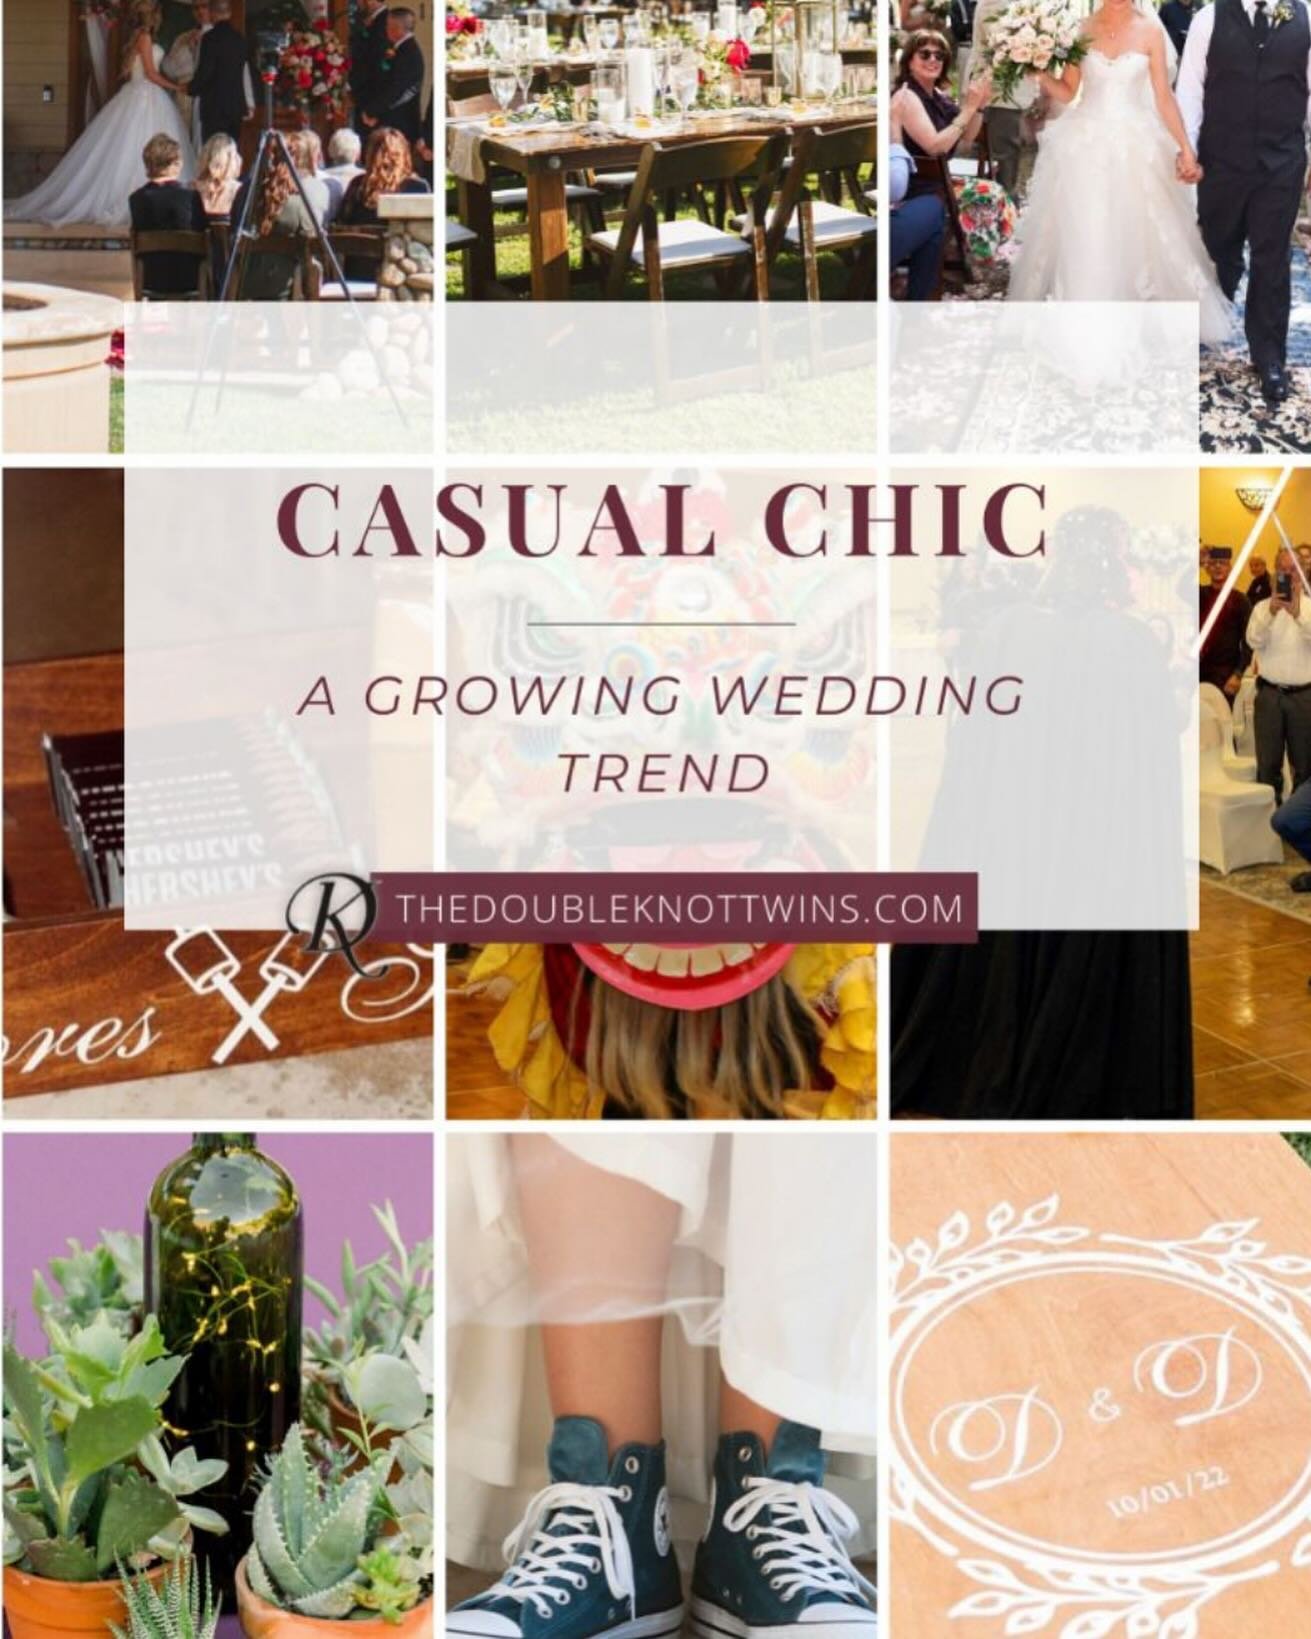 Follow the links in our BIO to our Pinterest and blogs!

#weddingplanner #dayofcoordination #weddingdaycoordinator #socalweddingplanner #socalweddingexpert #ocweddingplanner #ieweddingplanner #pinterest #weddingexpert #casualchicwedding